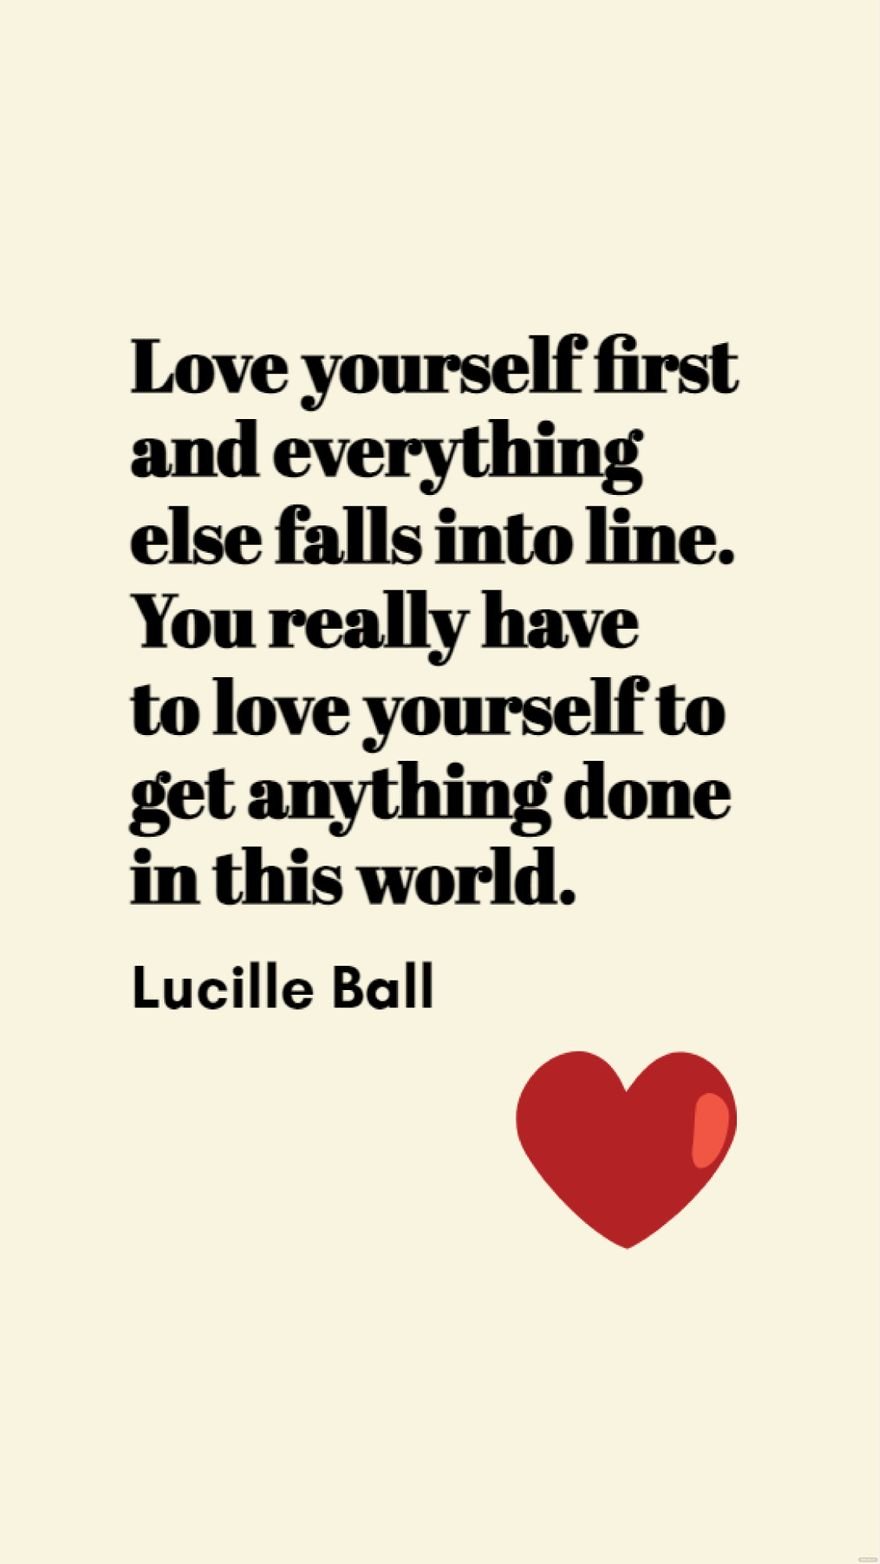 Lucille Ball - Love yourself first and everything else falls into line. You really have to love yourself to get anything done in this world.